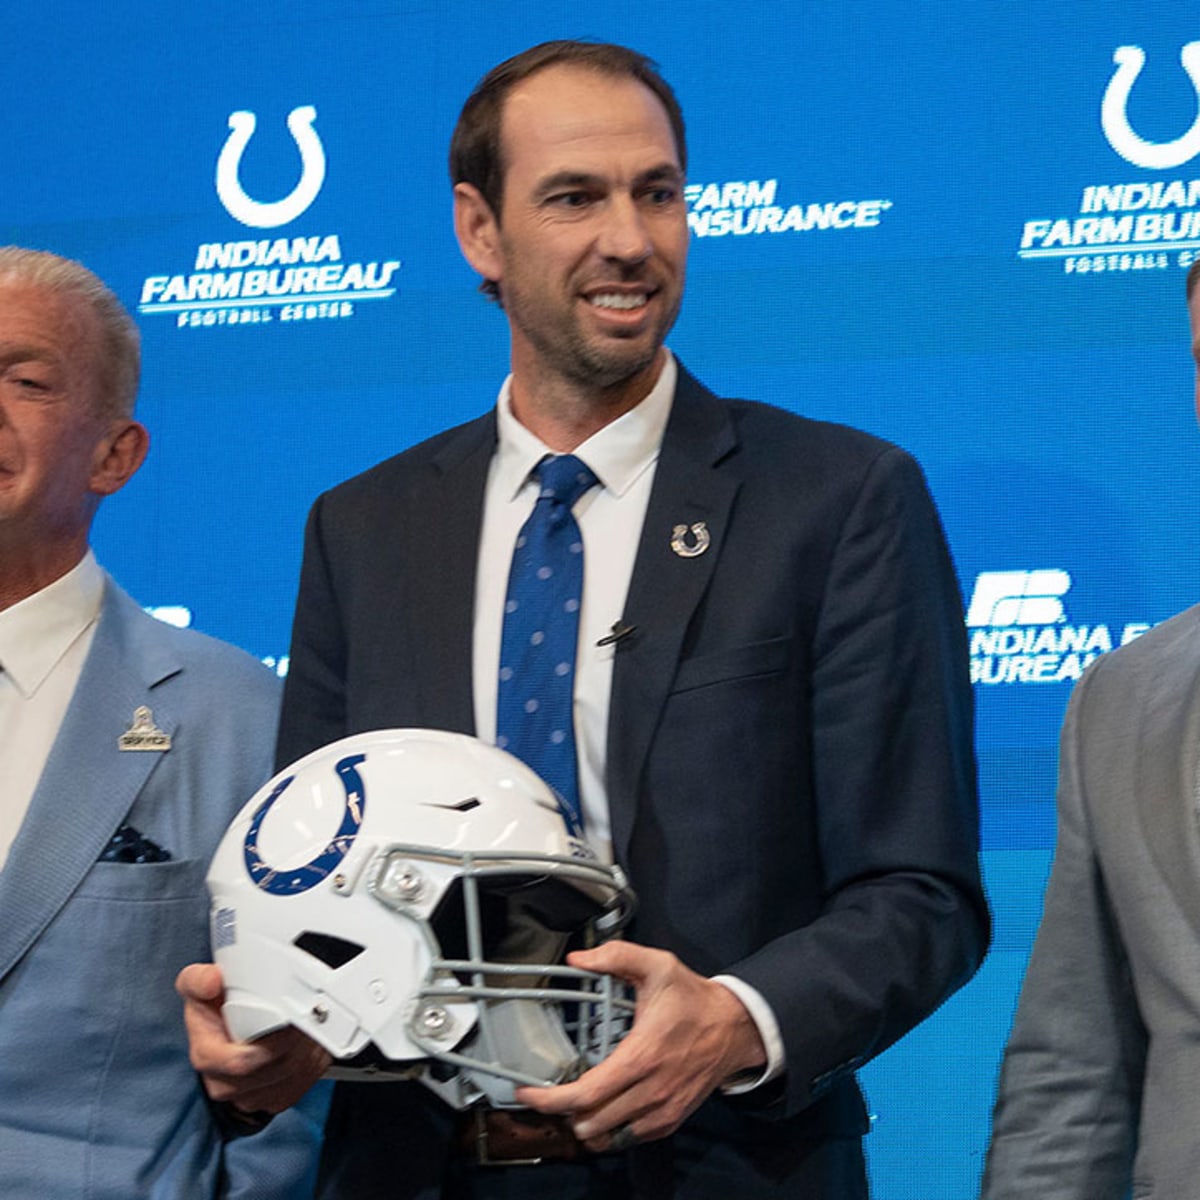 Colts coach Shane Steichen discusses plan to build new winning culture -  Sports Illustrated